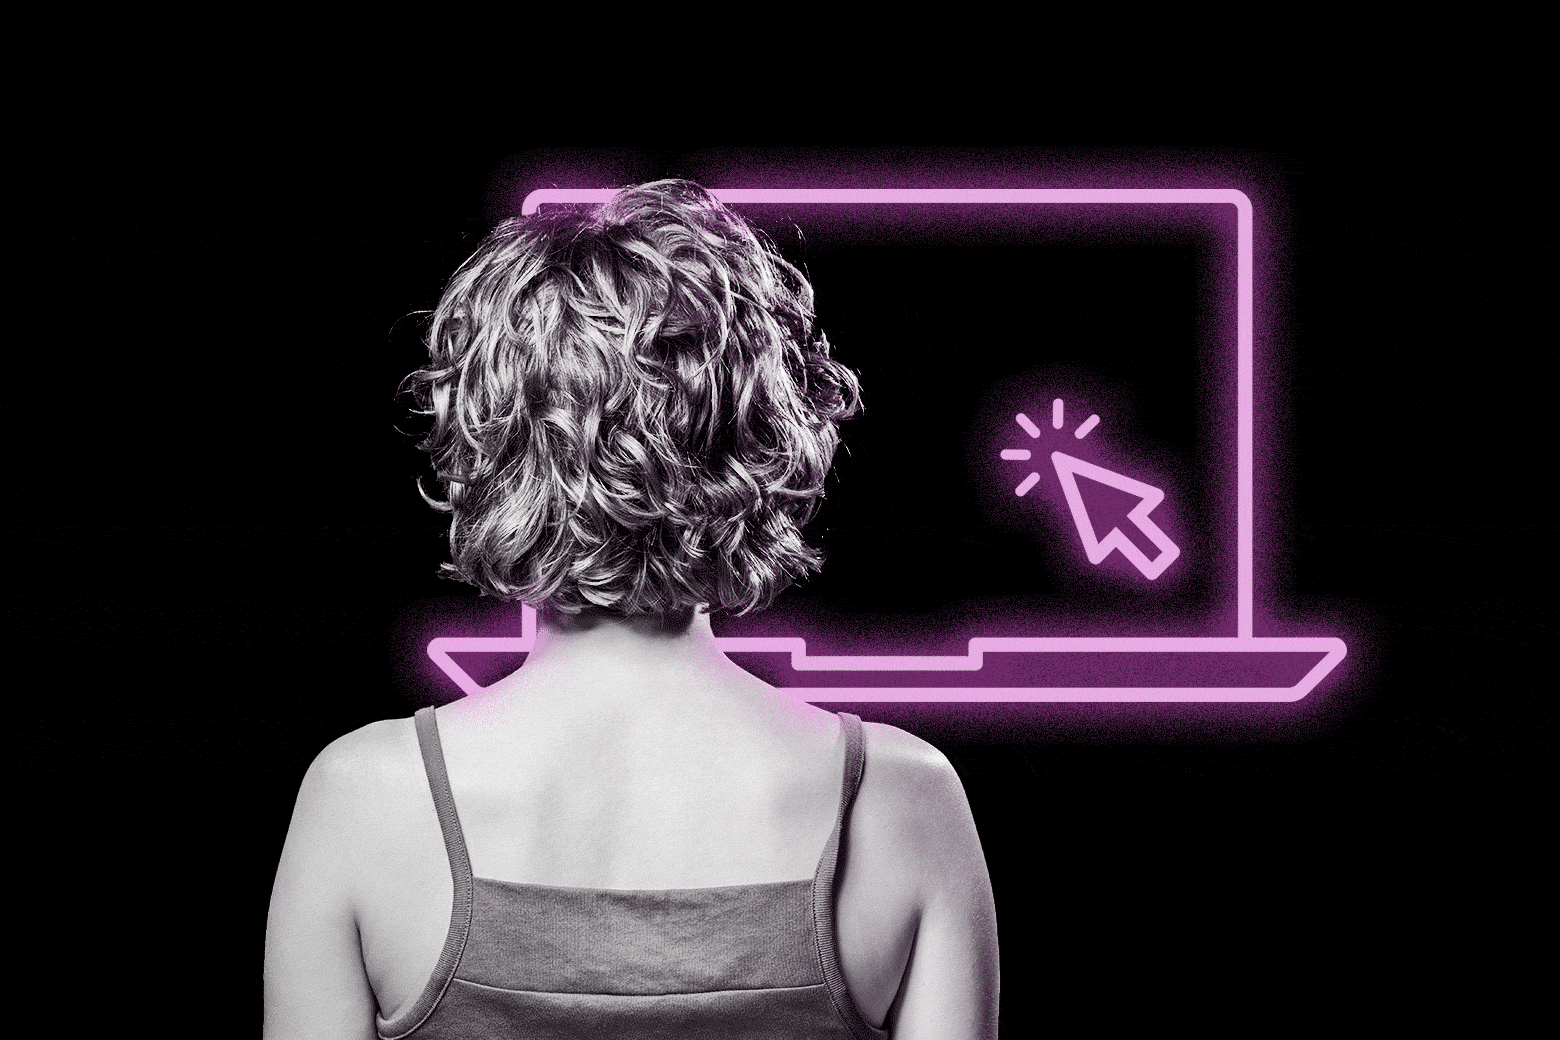 Woman seen from behind, looking at a laptop screen.